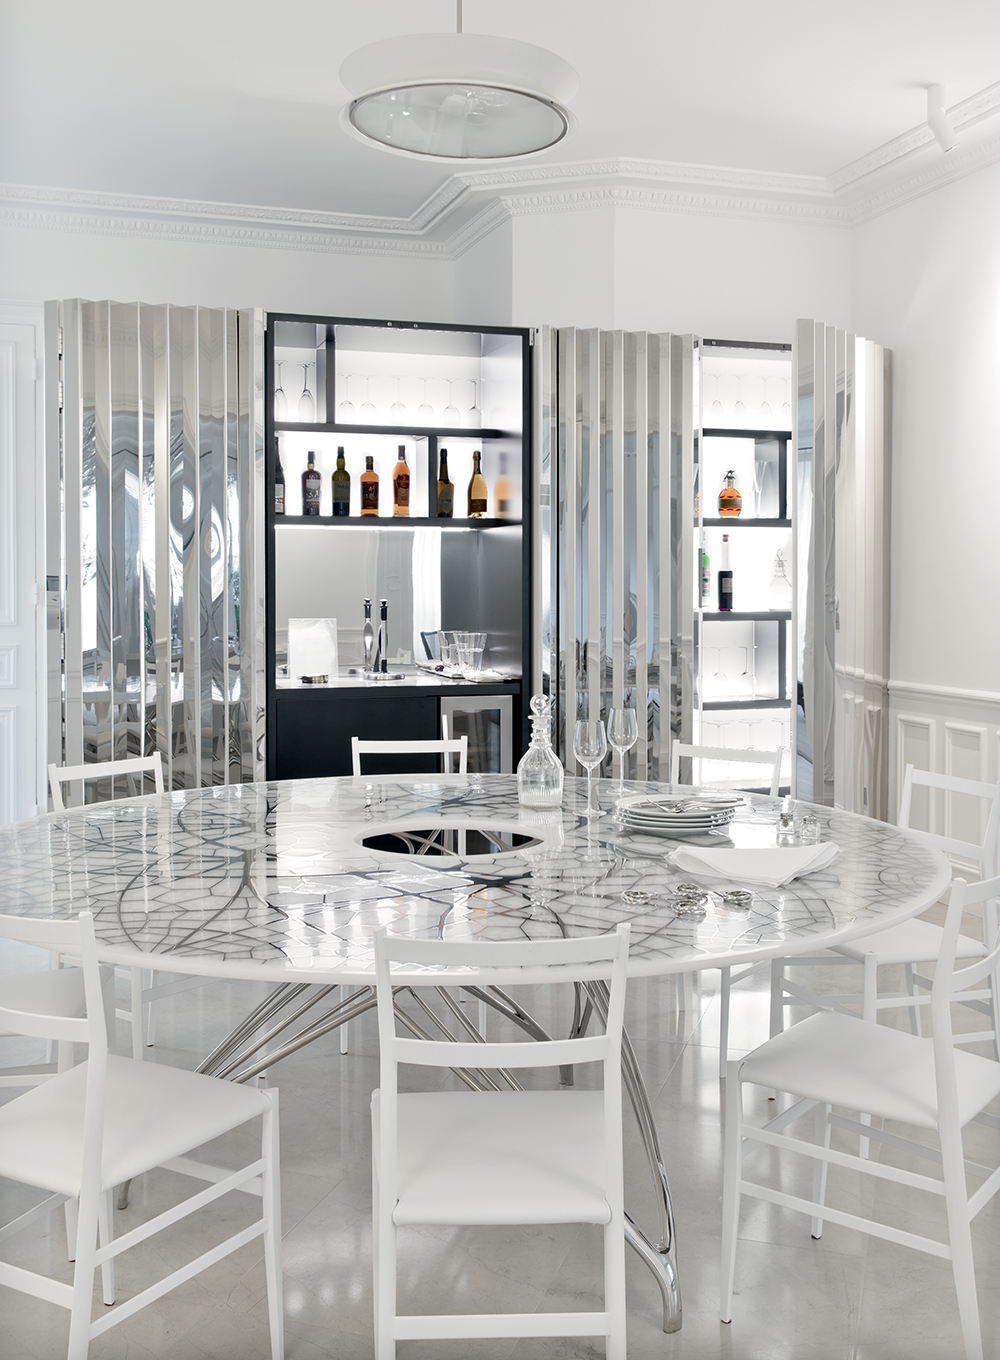 The custom-designed stainless steel cabinets conceal a bar, opened here in dramatic fashion, and keeps electronic equipment out of sight. A Joris Laarman table is paired with Gio Ponti “Superleggera” chairs.